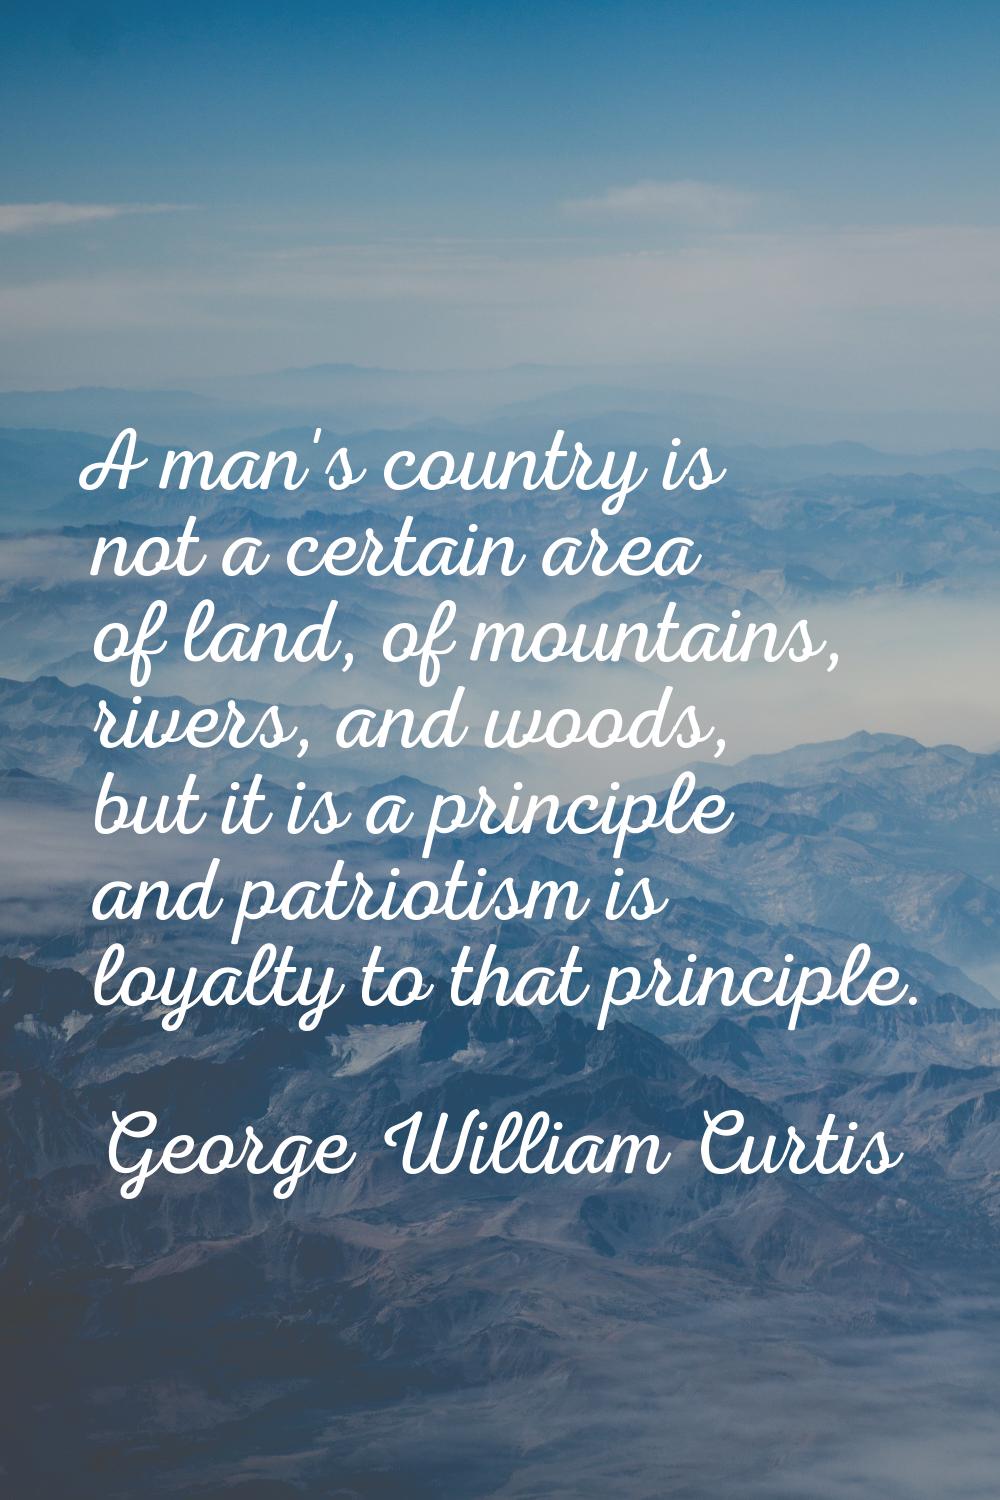 A man's country is not a certain area of land, of mountains, rivers, and woods, but it is a princip